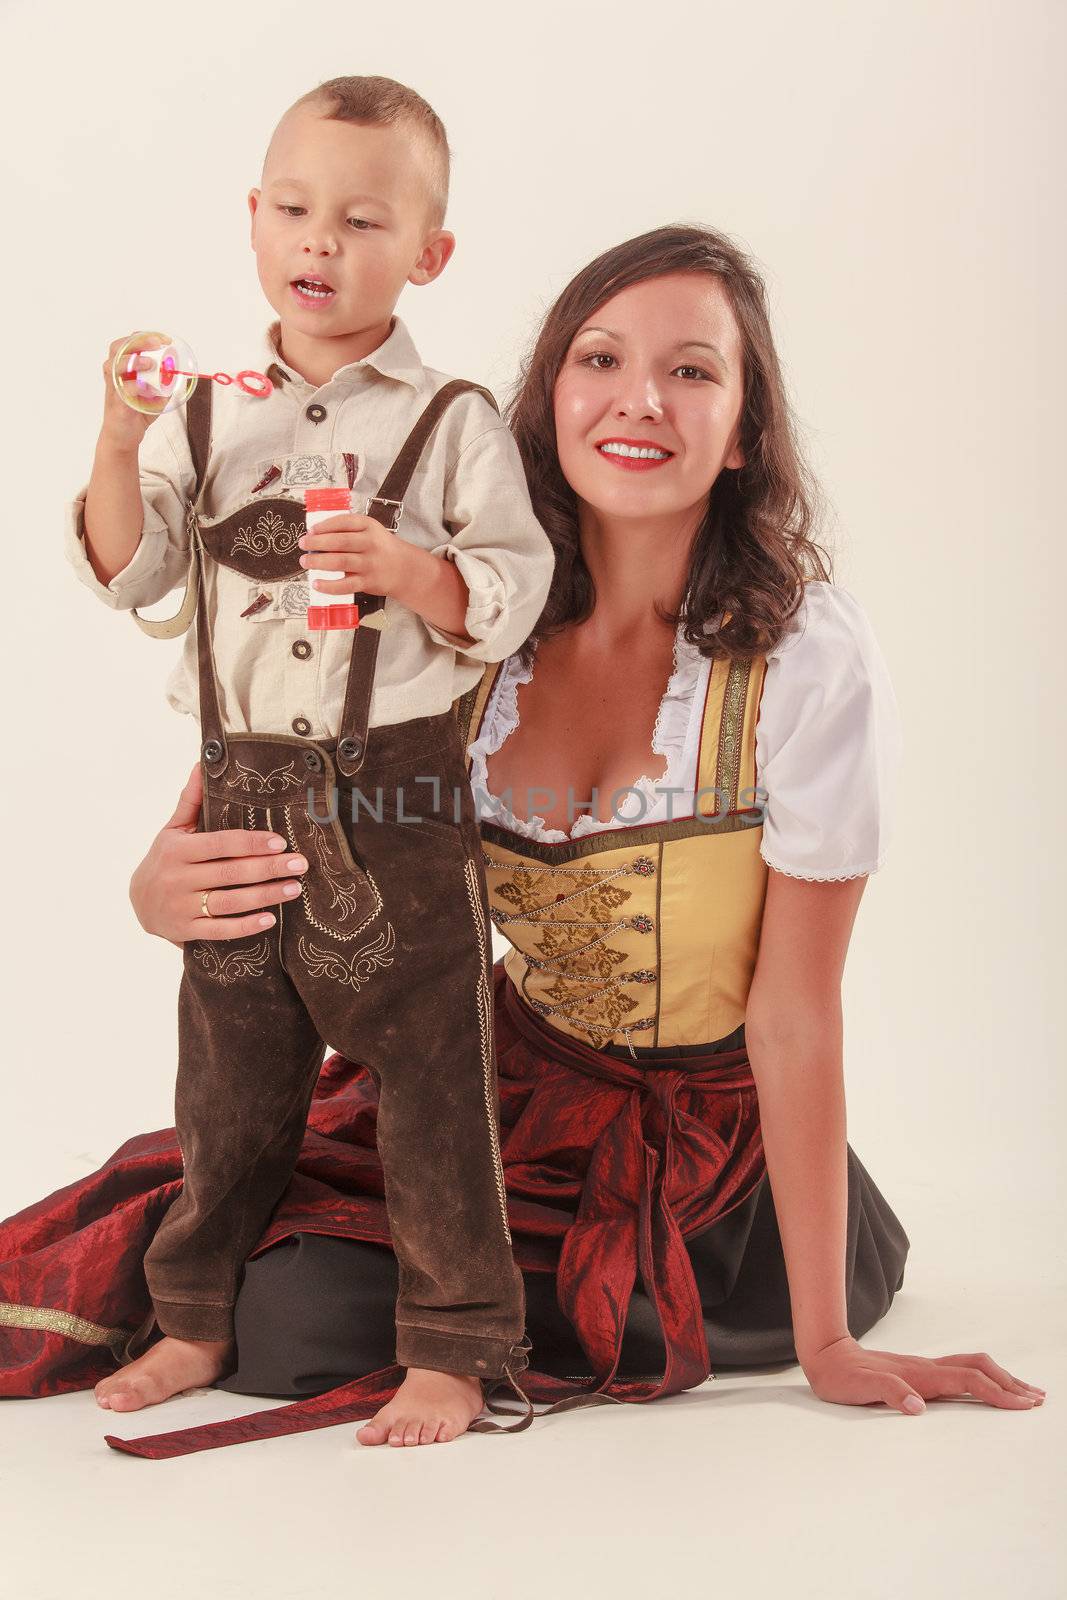 Bavarian Mother and Child by STphotography